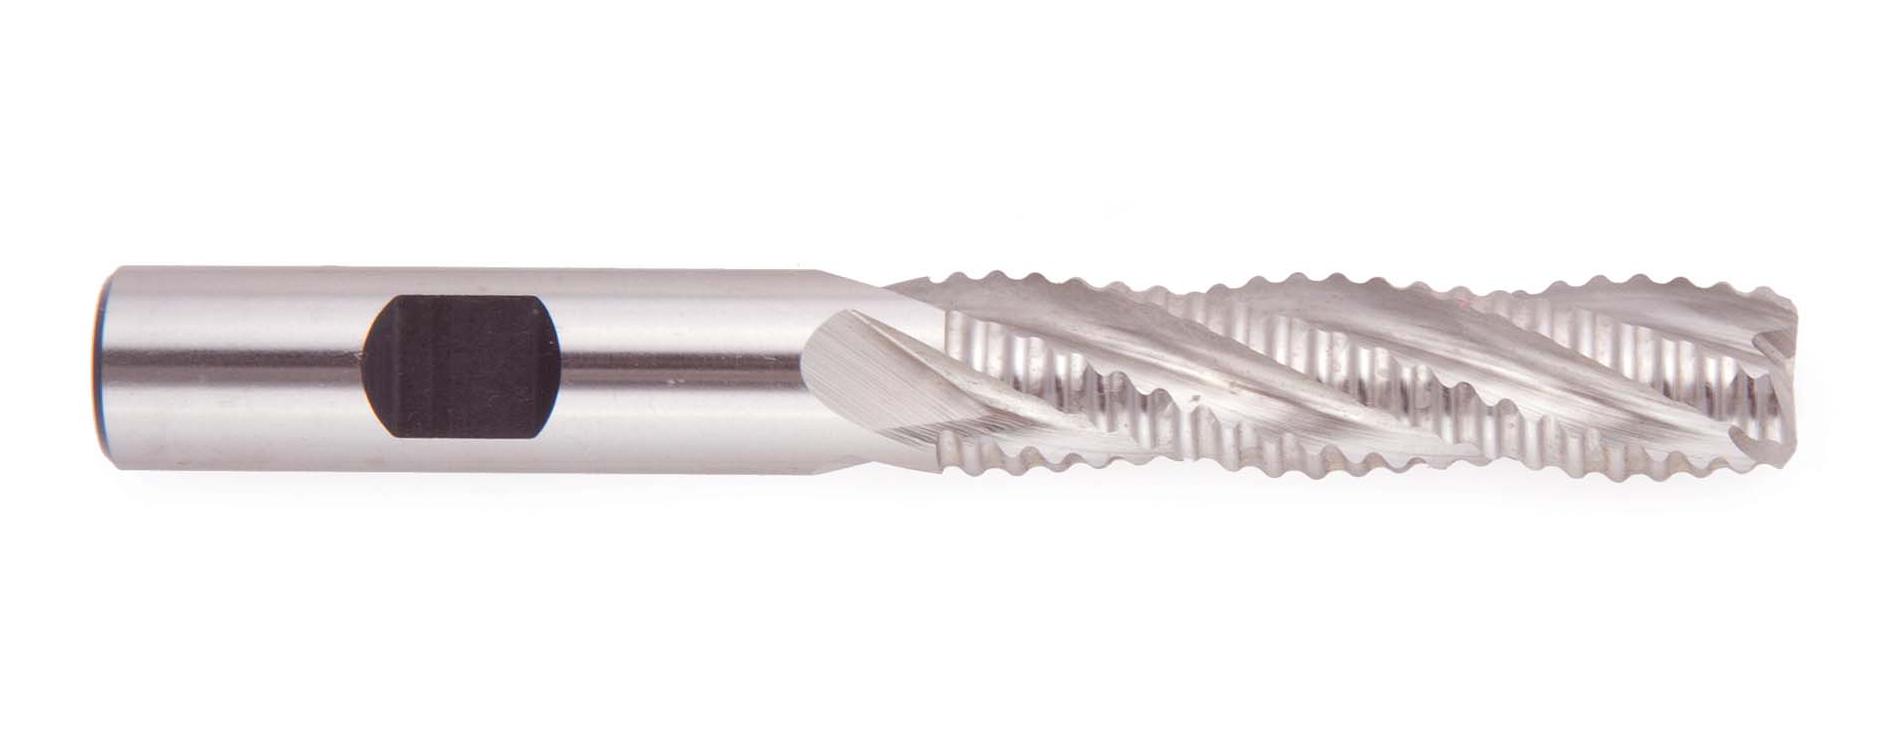 Drill America CBD 1/4 Cobalt End Mill 2-7/1 Overall Length TIN Fine Roughing